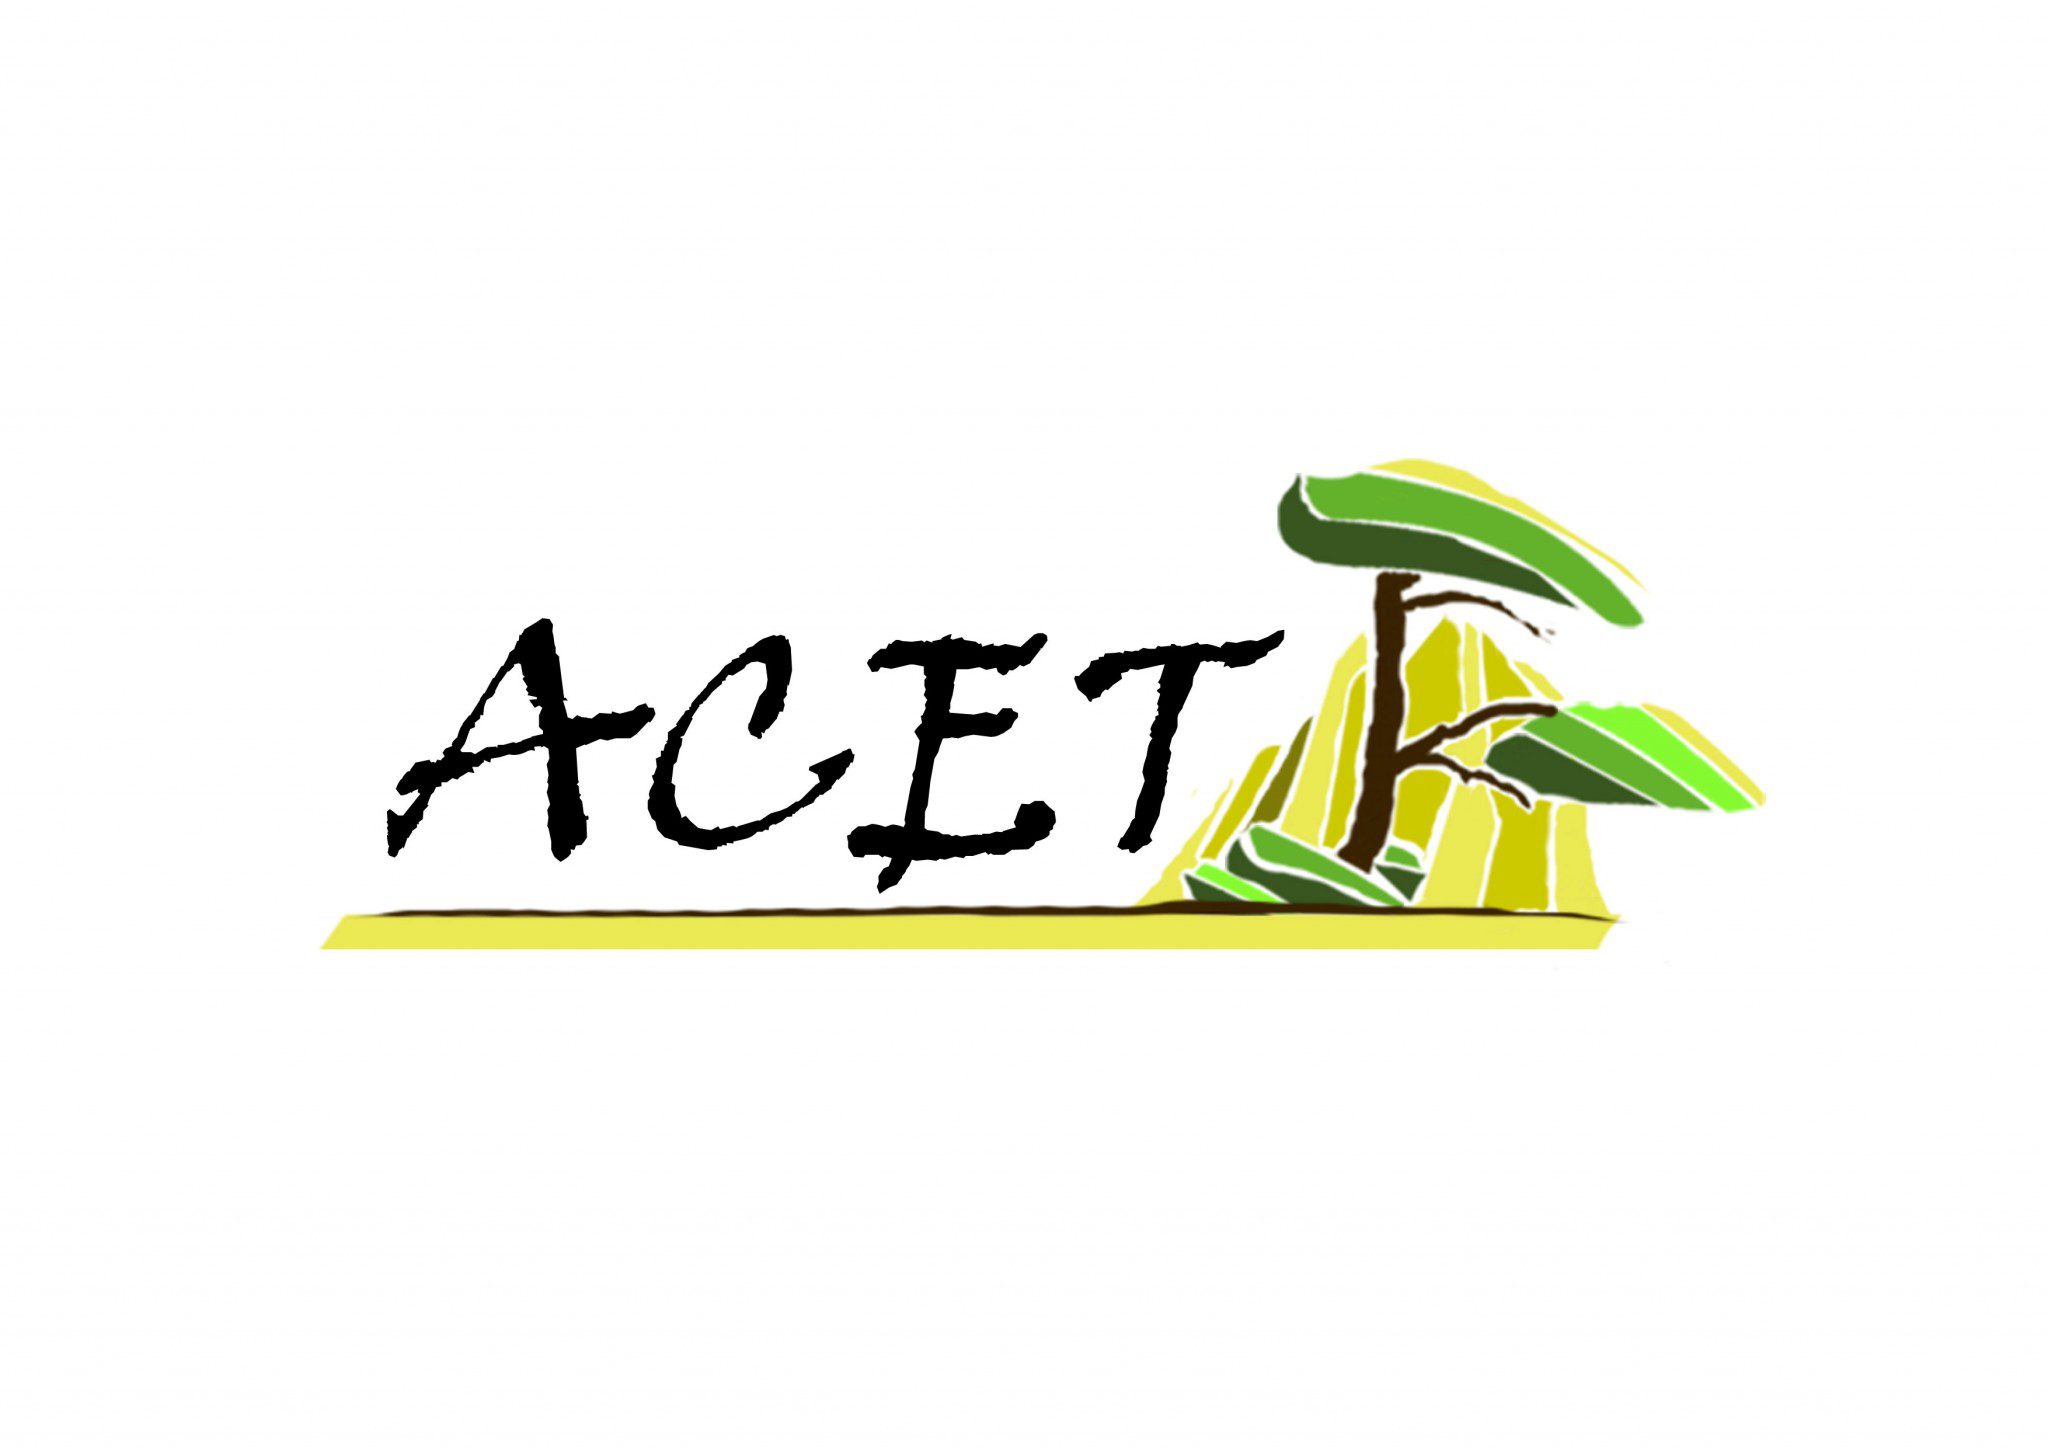 Logo and manual - ACET